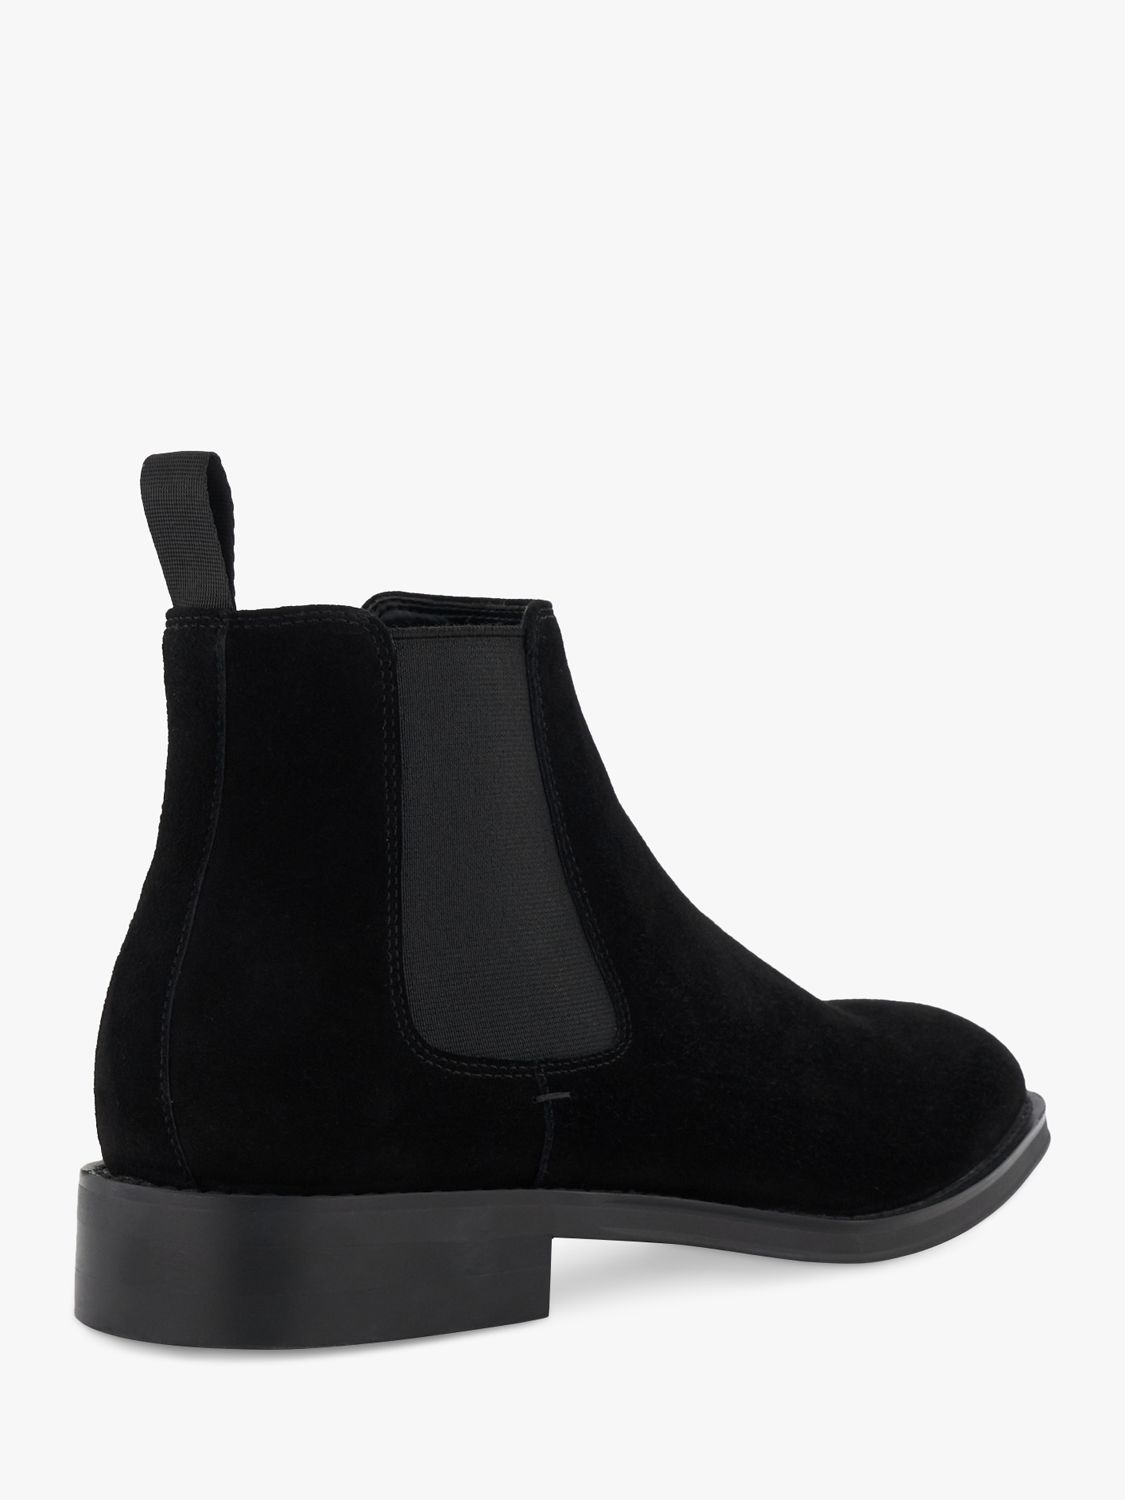 Dune Masons Suede Chelsea Boots, Black at John Lewis & Partners